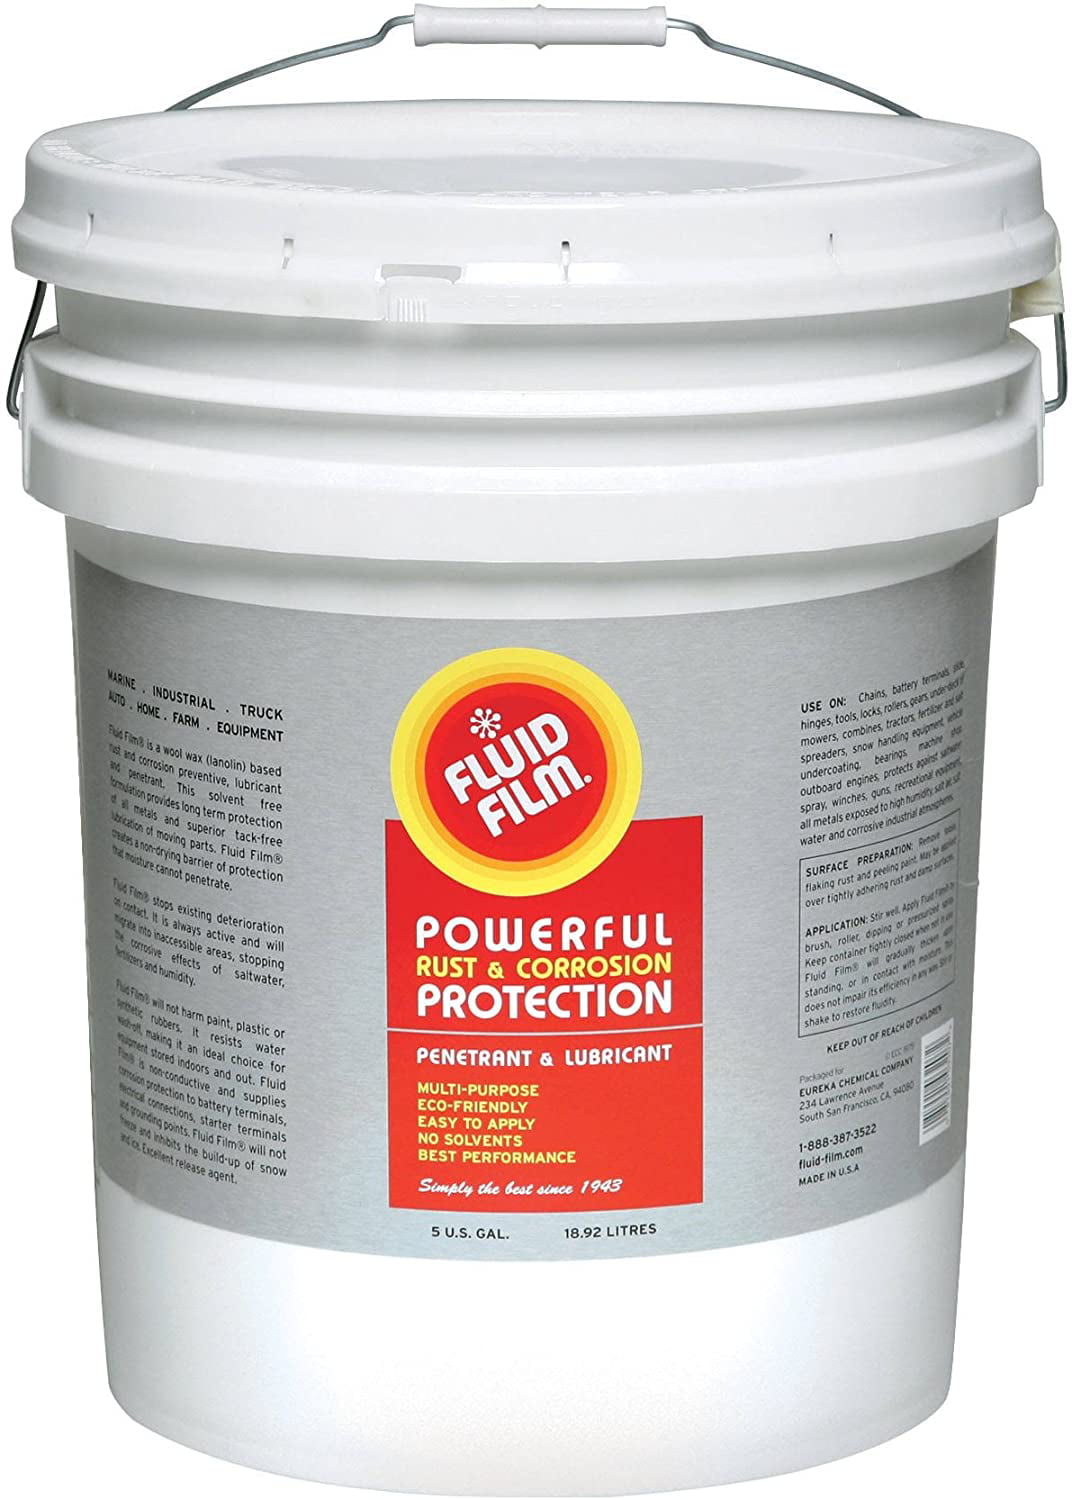 Tranny fluid for rust proofing